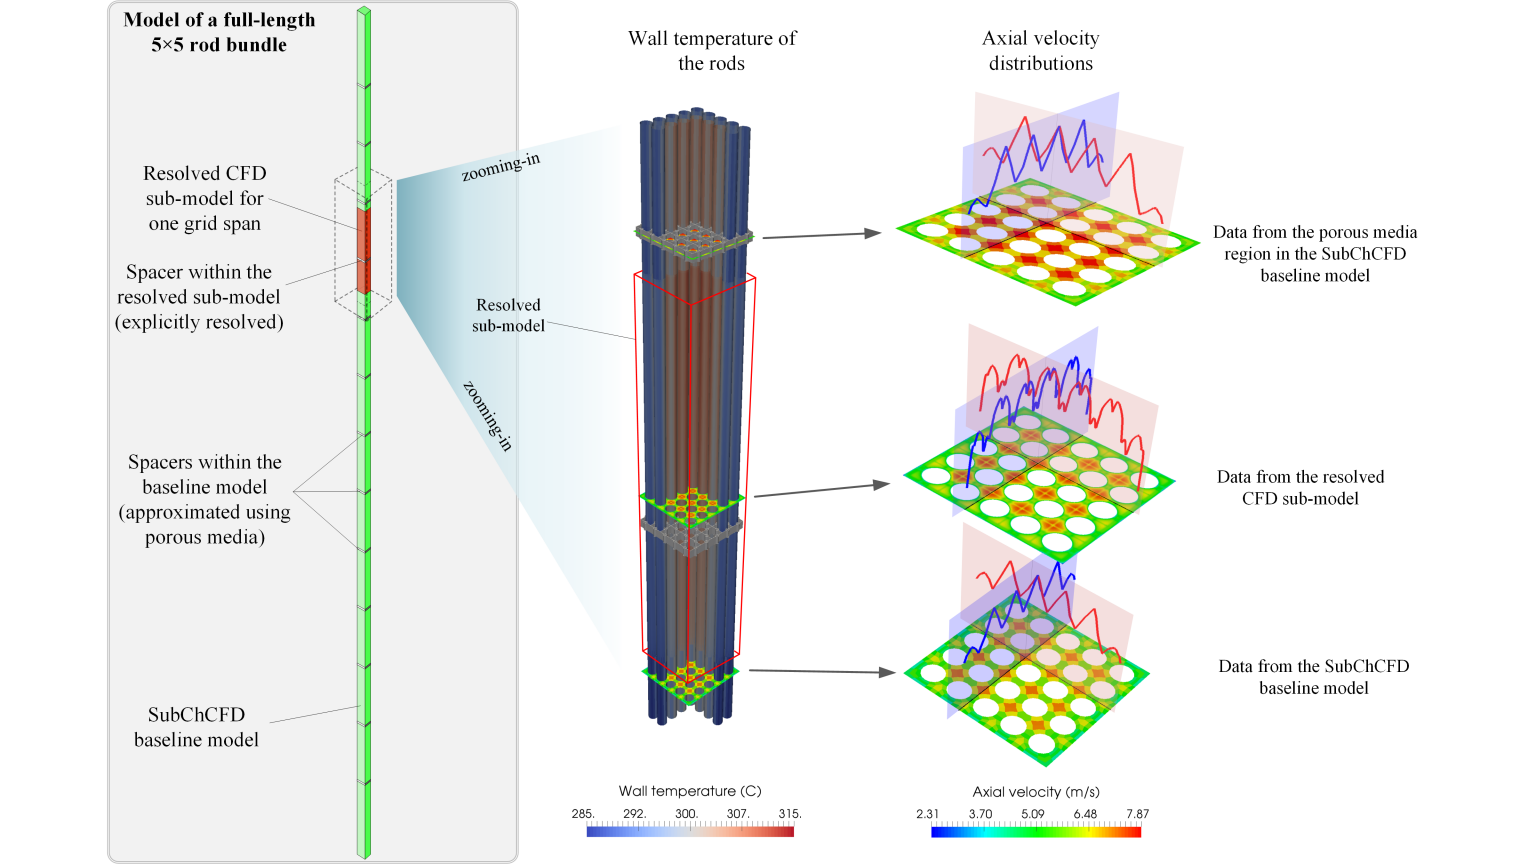 A coupled simulation between SubChCFD and resolved CFD with the porous media method for a 5-metre long 5x5 rod bundle with spacers